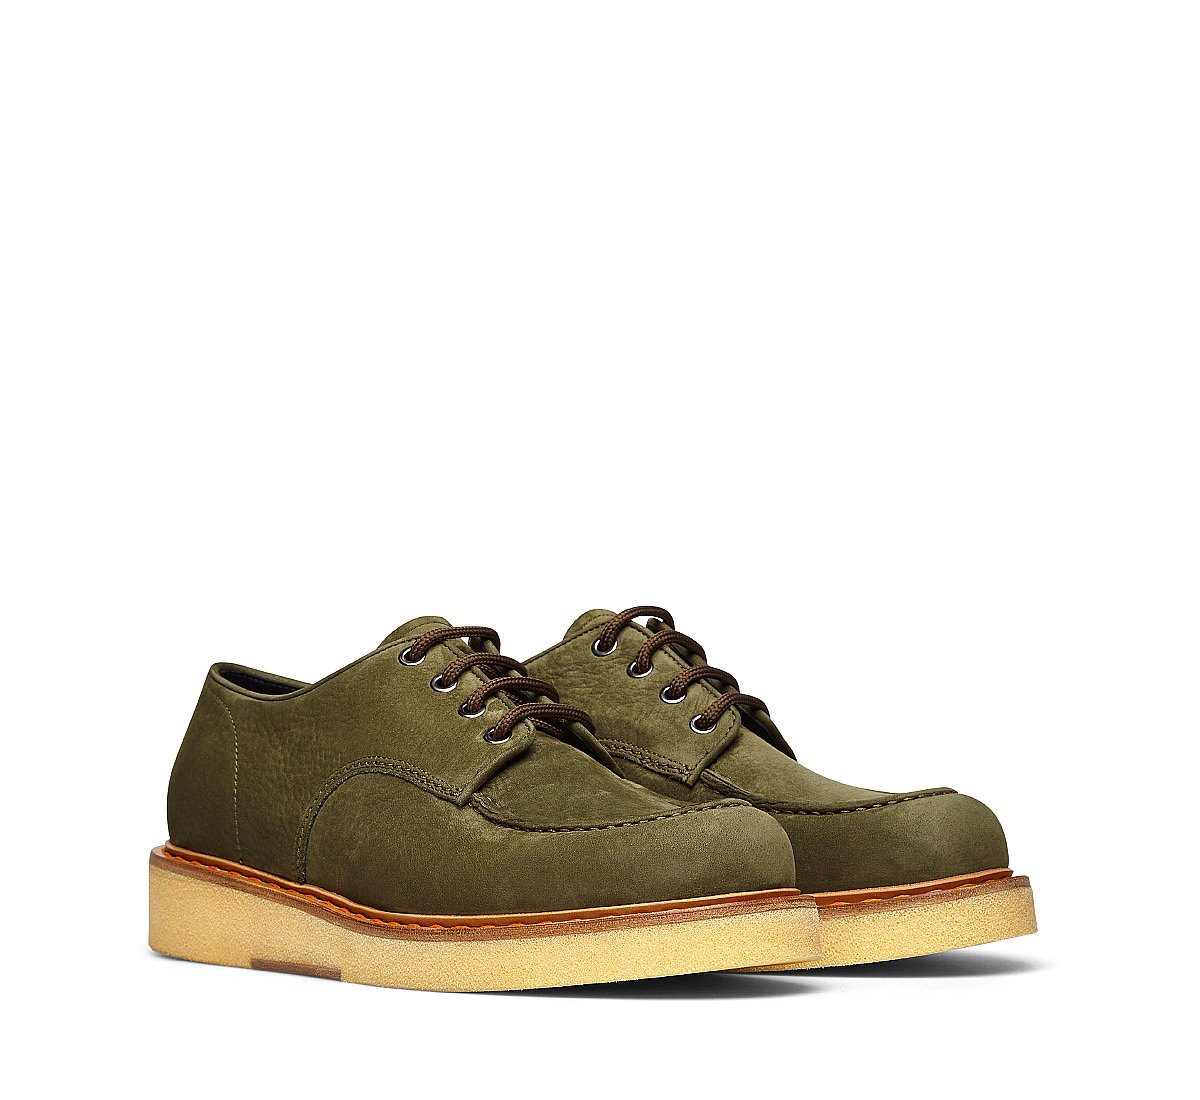 Barracuda lace-ups in soft Nubuck leather